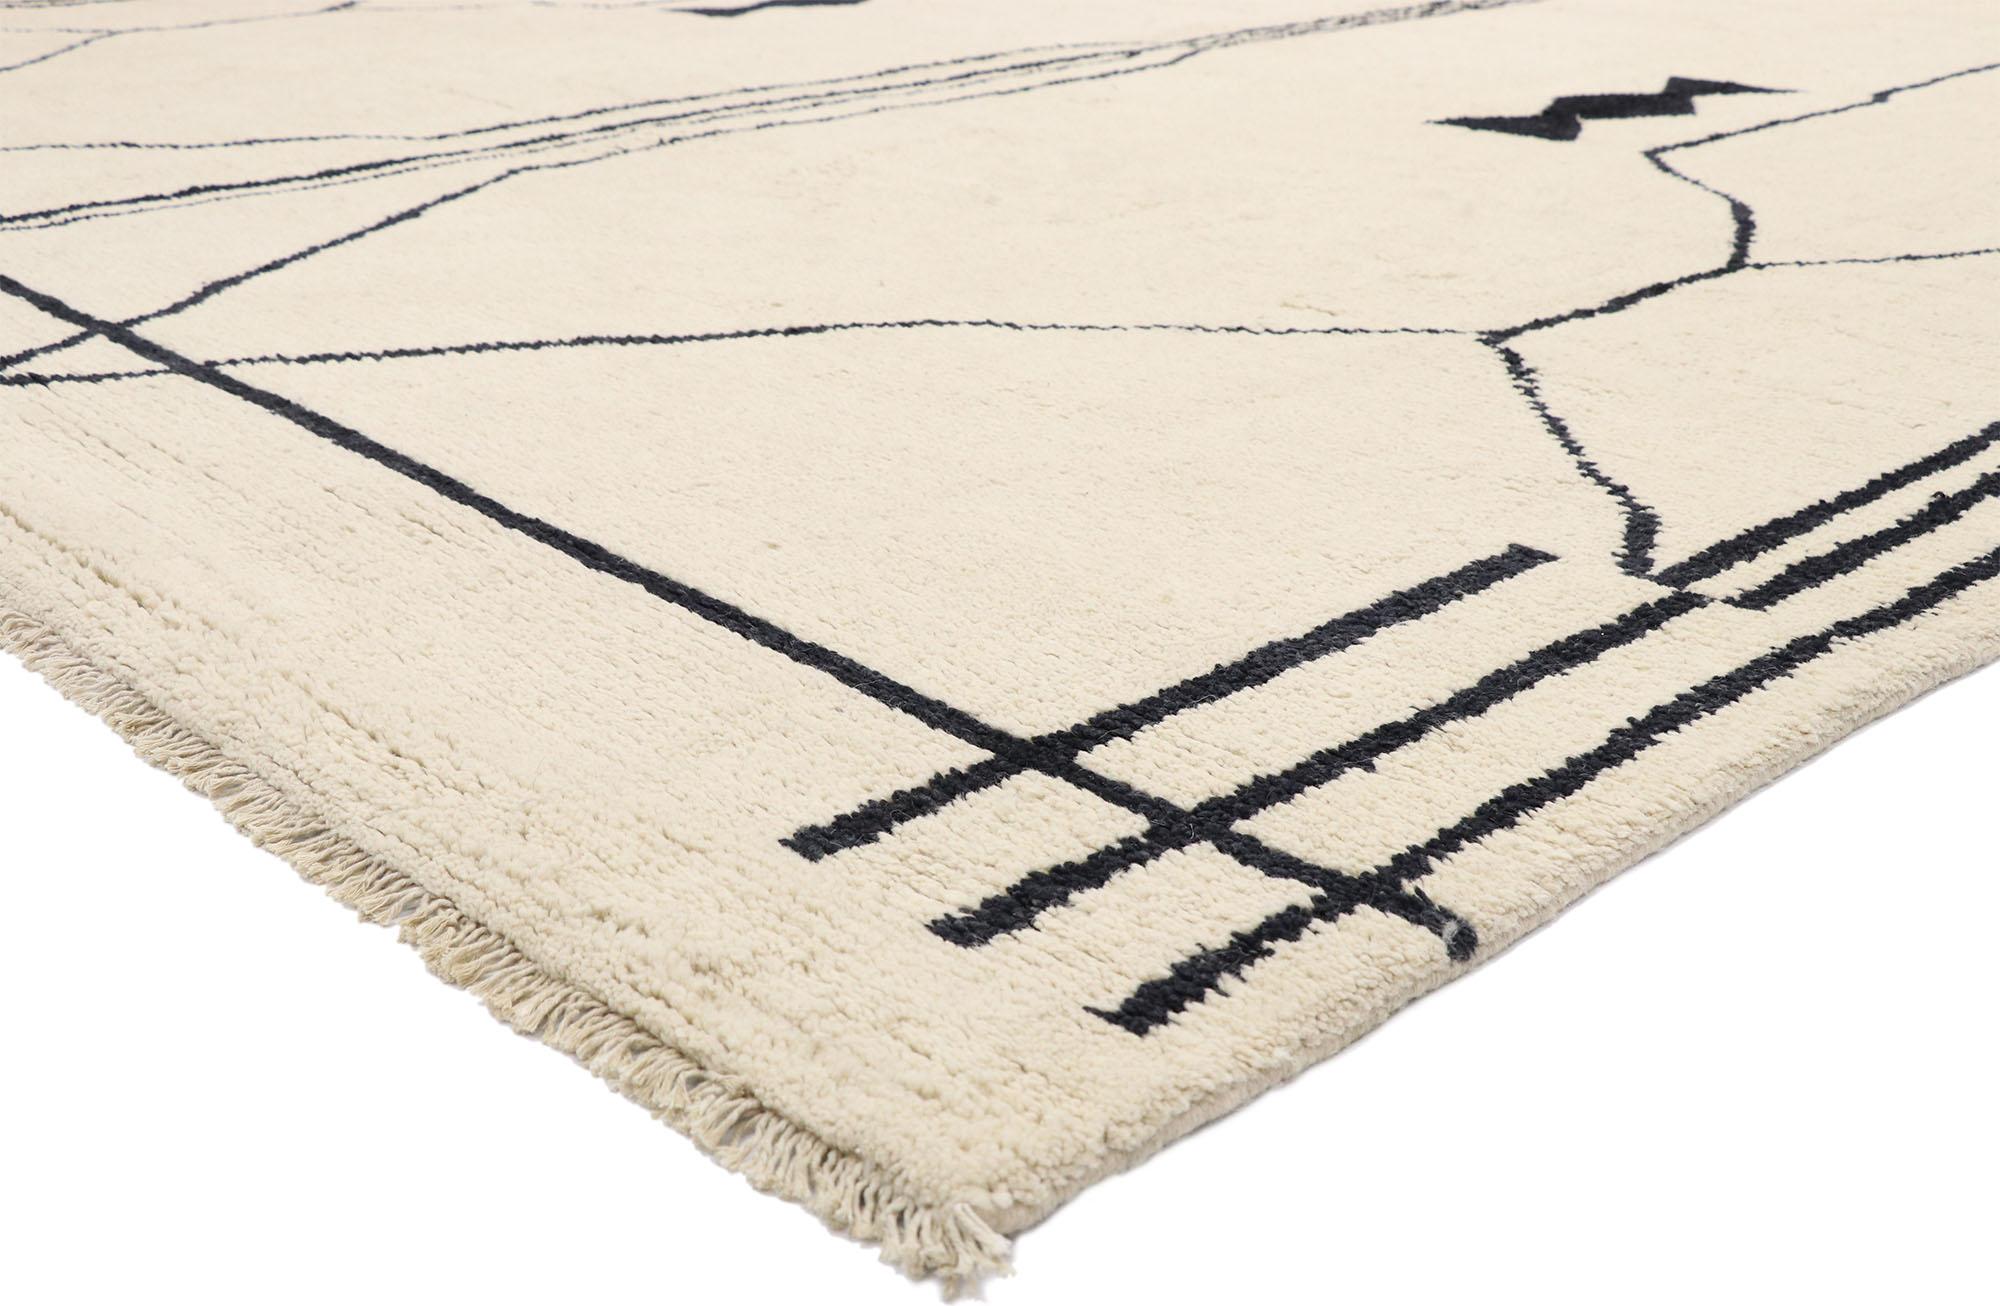 80546, contemporary large Moroccan Area rug with Line Art and Tribal style. This hand knotted wool contemporary Moroccan area rug with line art design and tribal style features contrasting black lines running the length of the creamy-beige backdrop